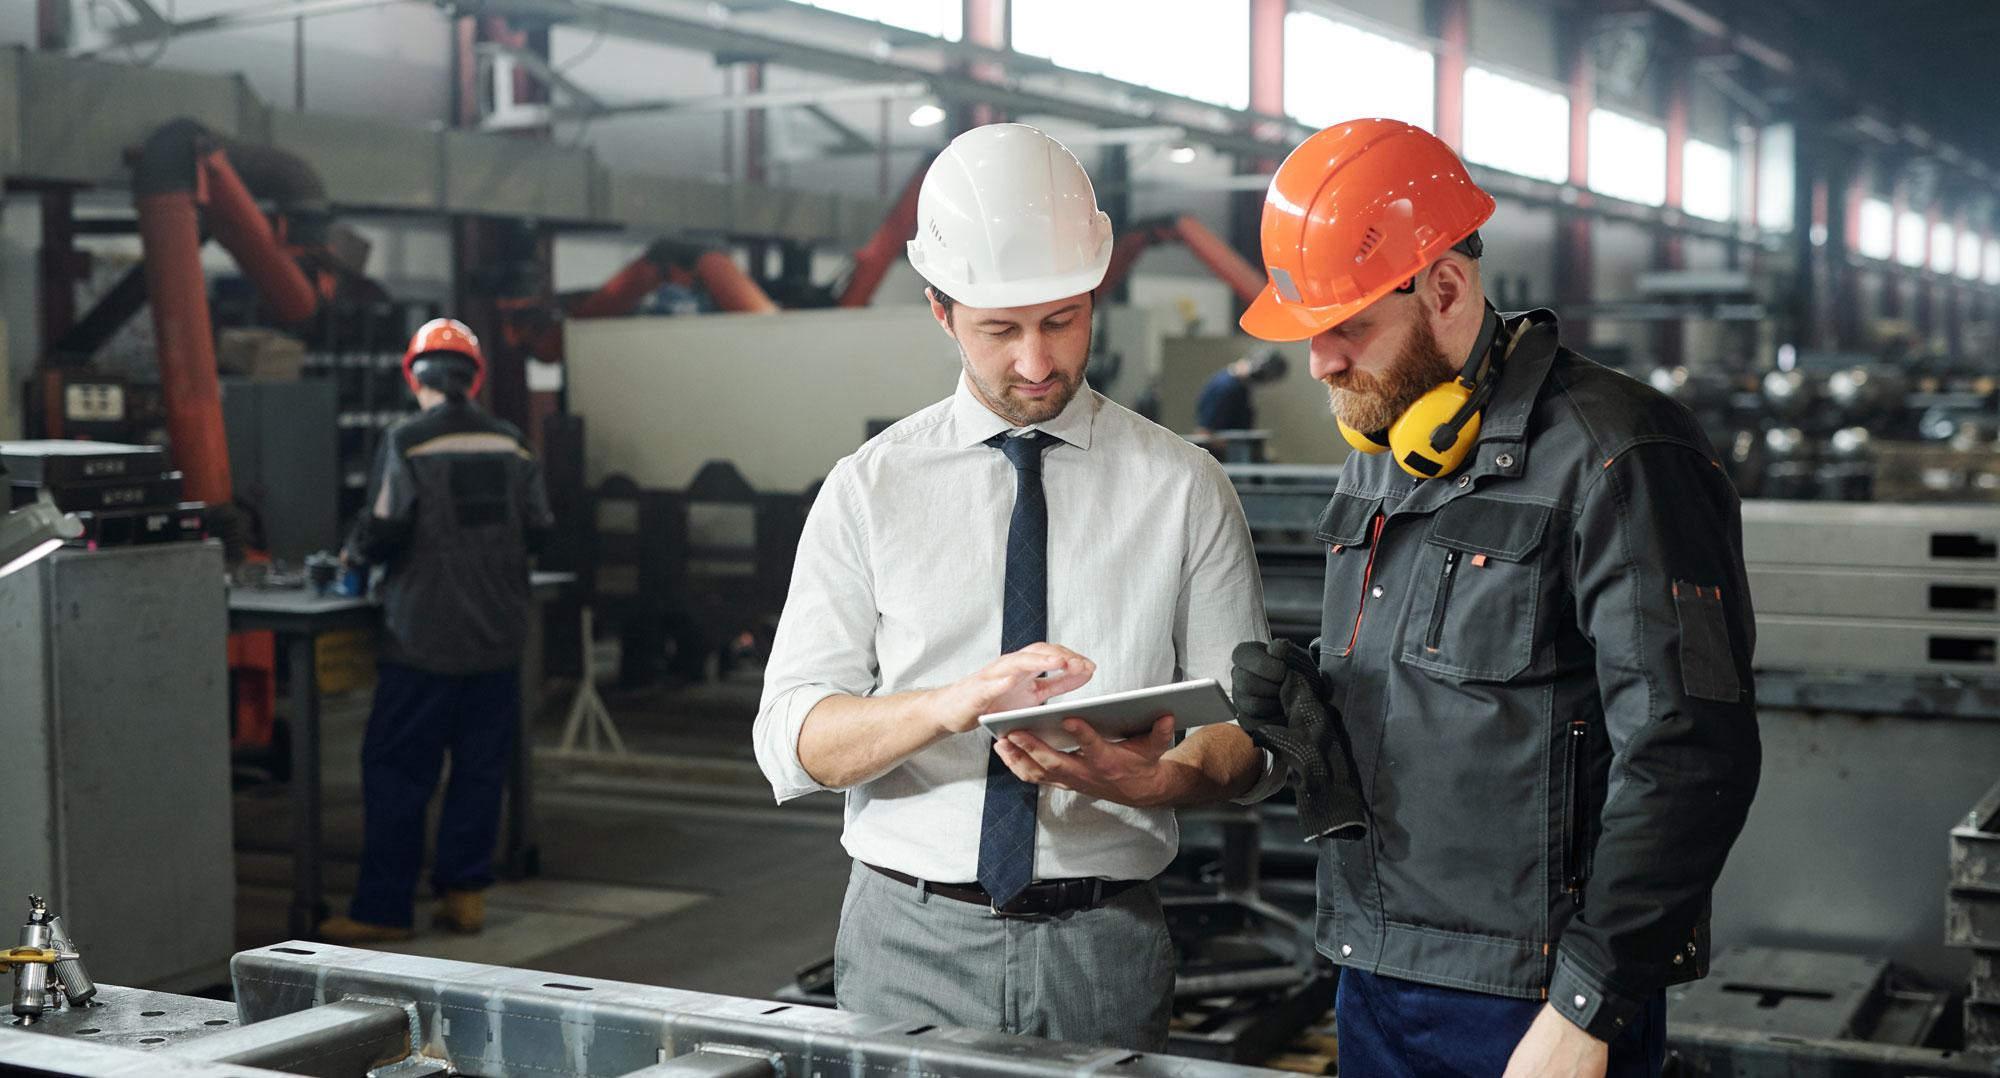 Two men in a factory wearing hard hats and viewing a tablet